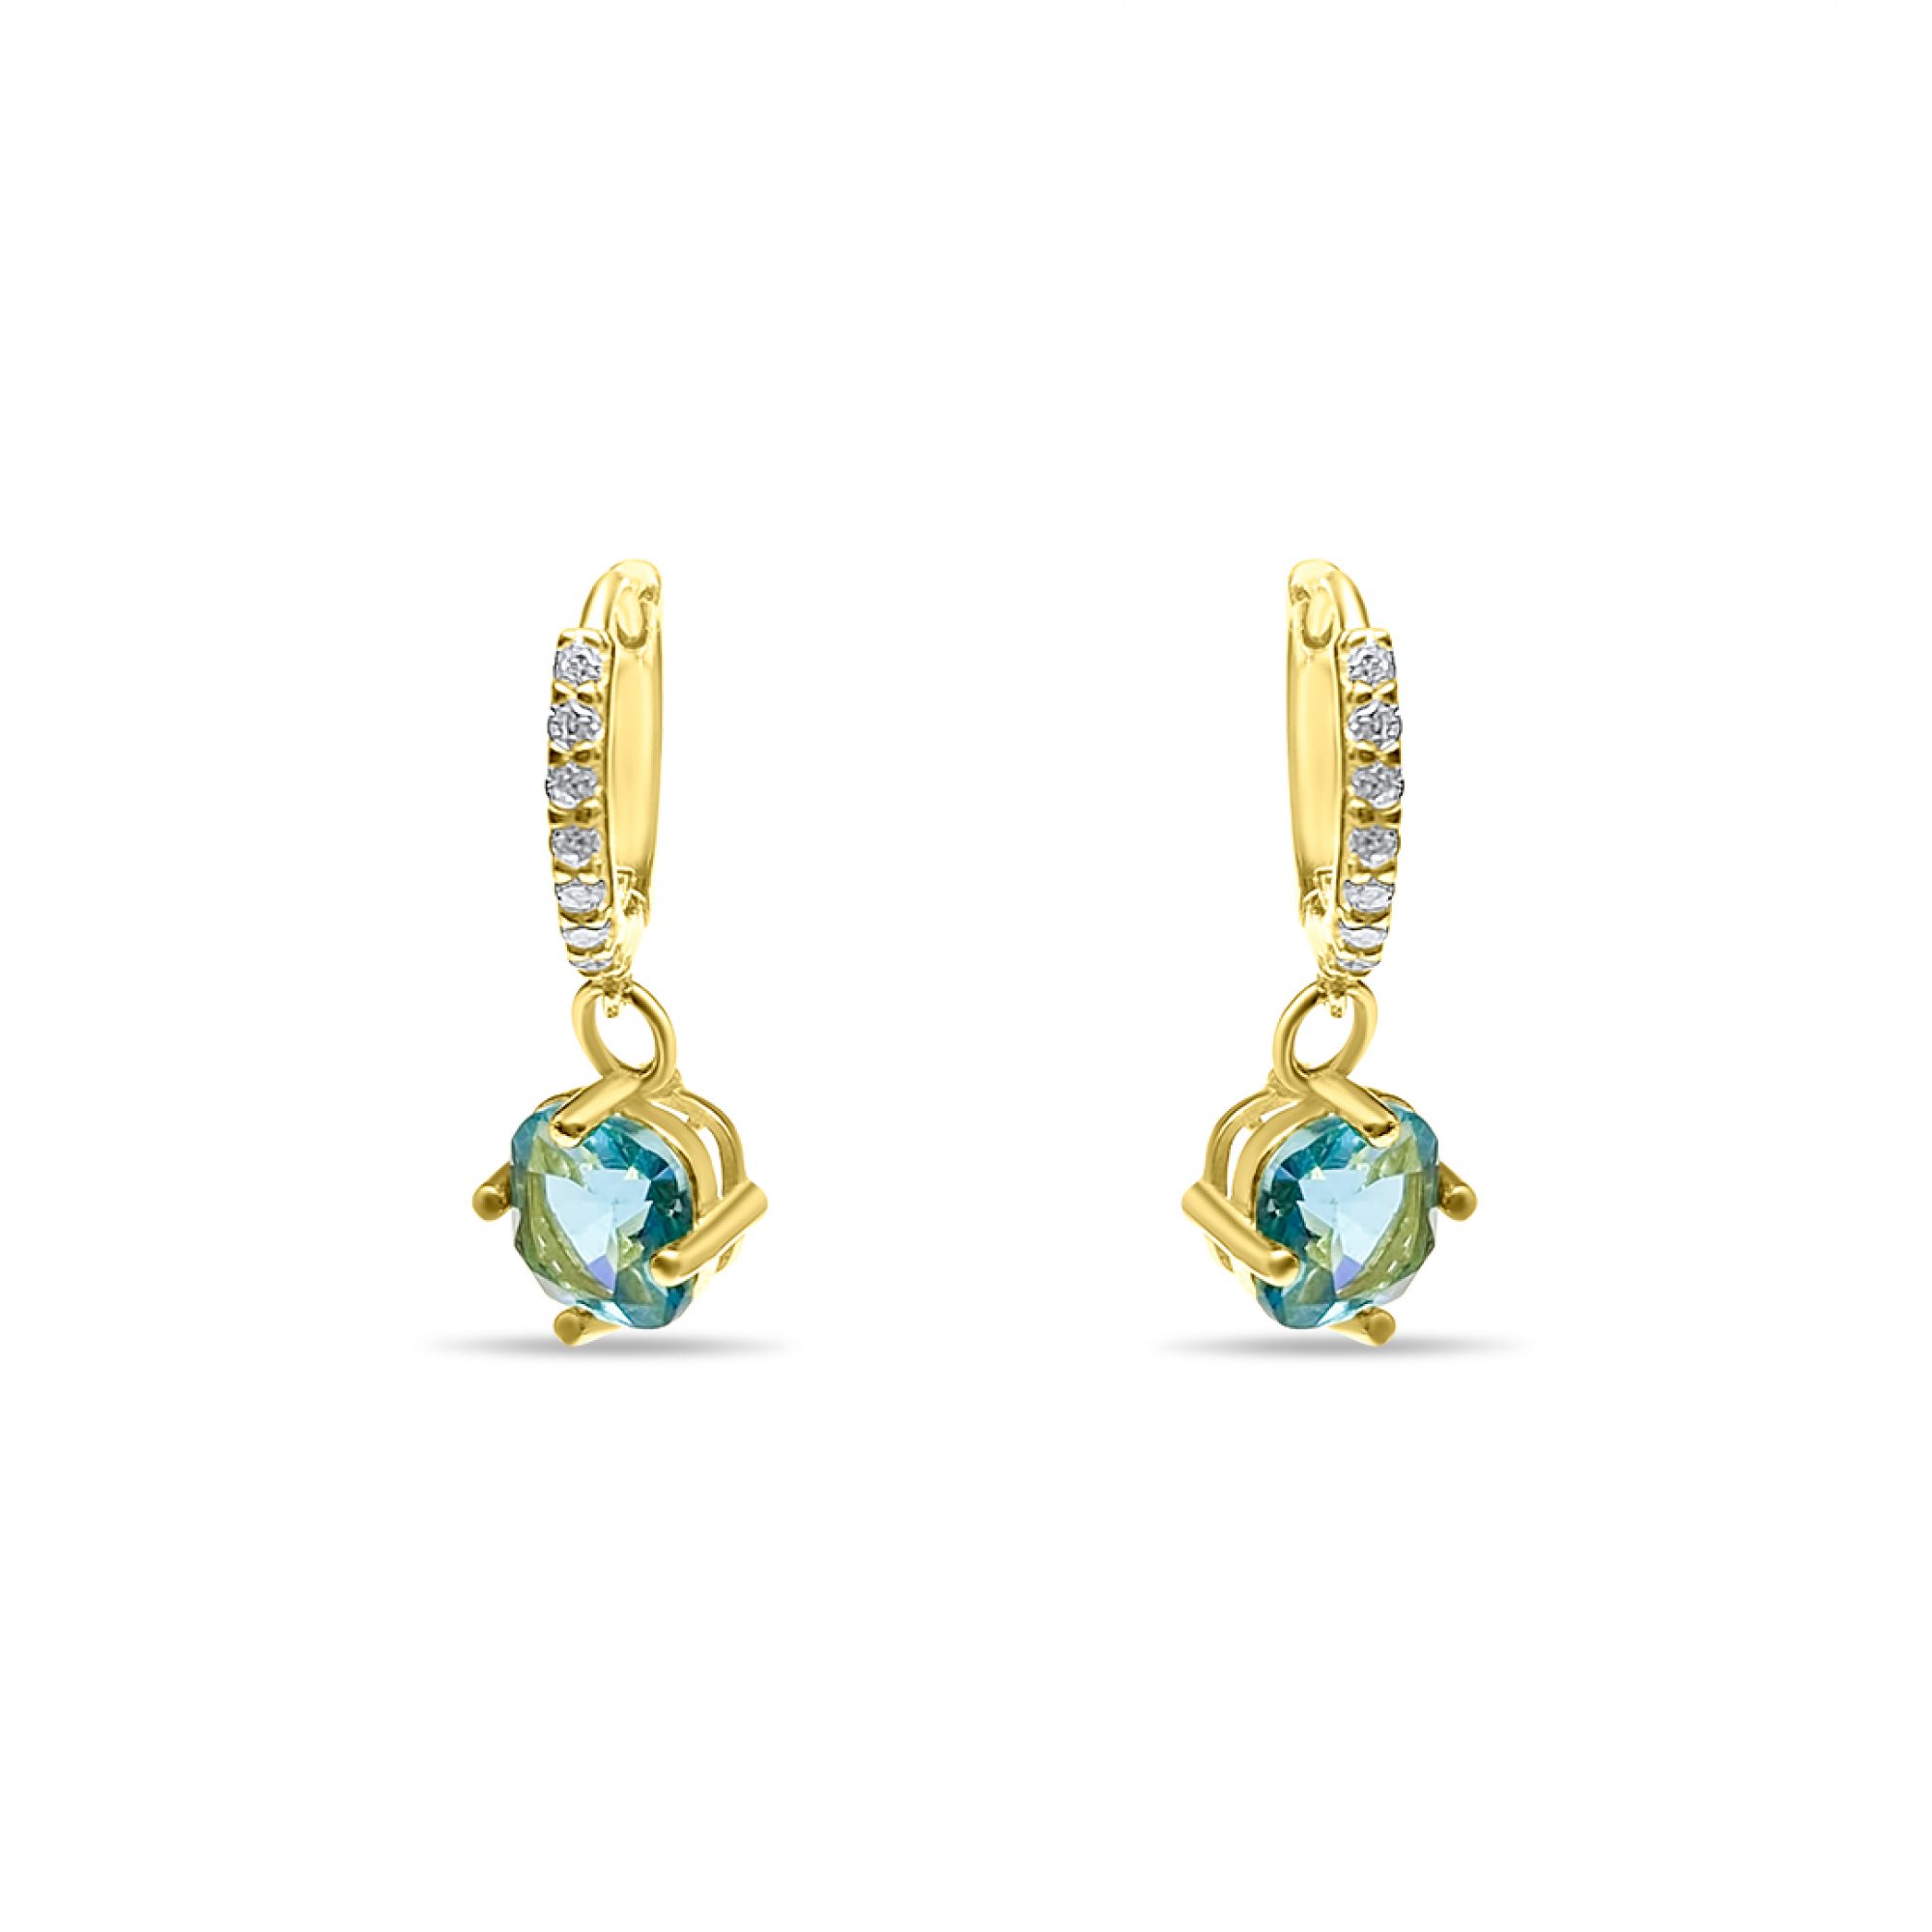 Gold plated earrings with aqua marine and zircon stones